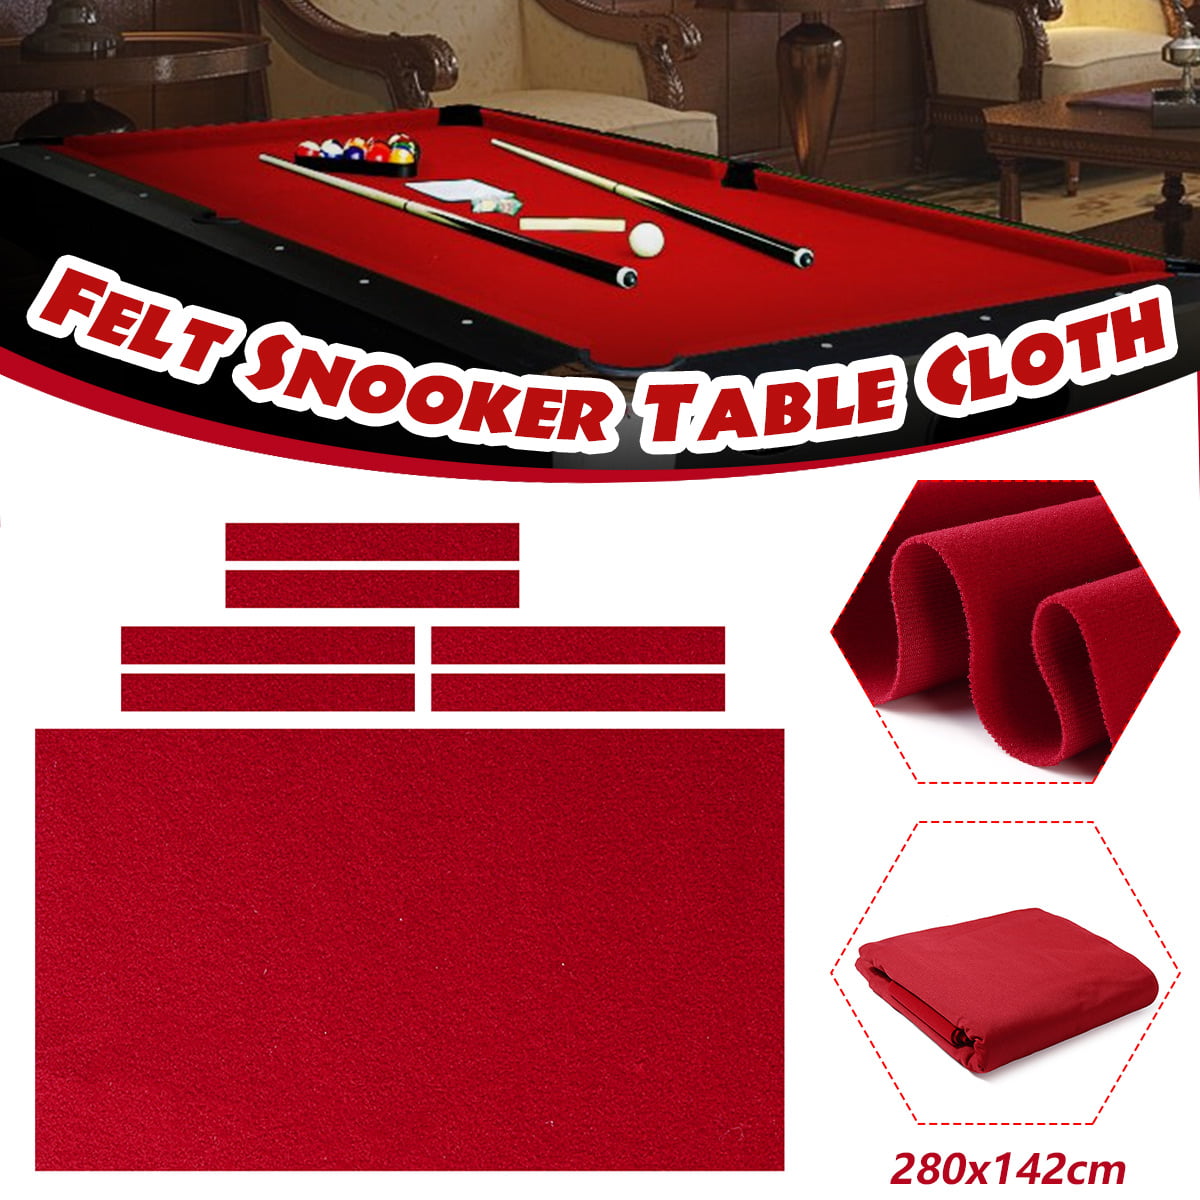 2.8 Meters Long Professional Pool Table Felt Billiard Cloth with Side Cloth/ Pool Cue Tip Corrector/ Chalk/ Brush/ Towel Indoor Pool Table Cloth Set for 7/ 8/ 9 ft Billiard Tables 